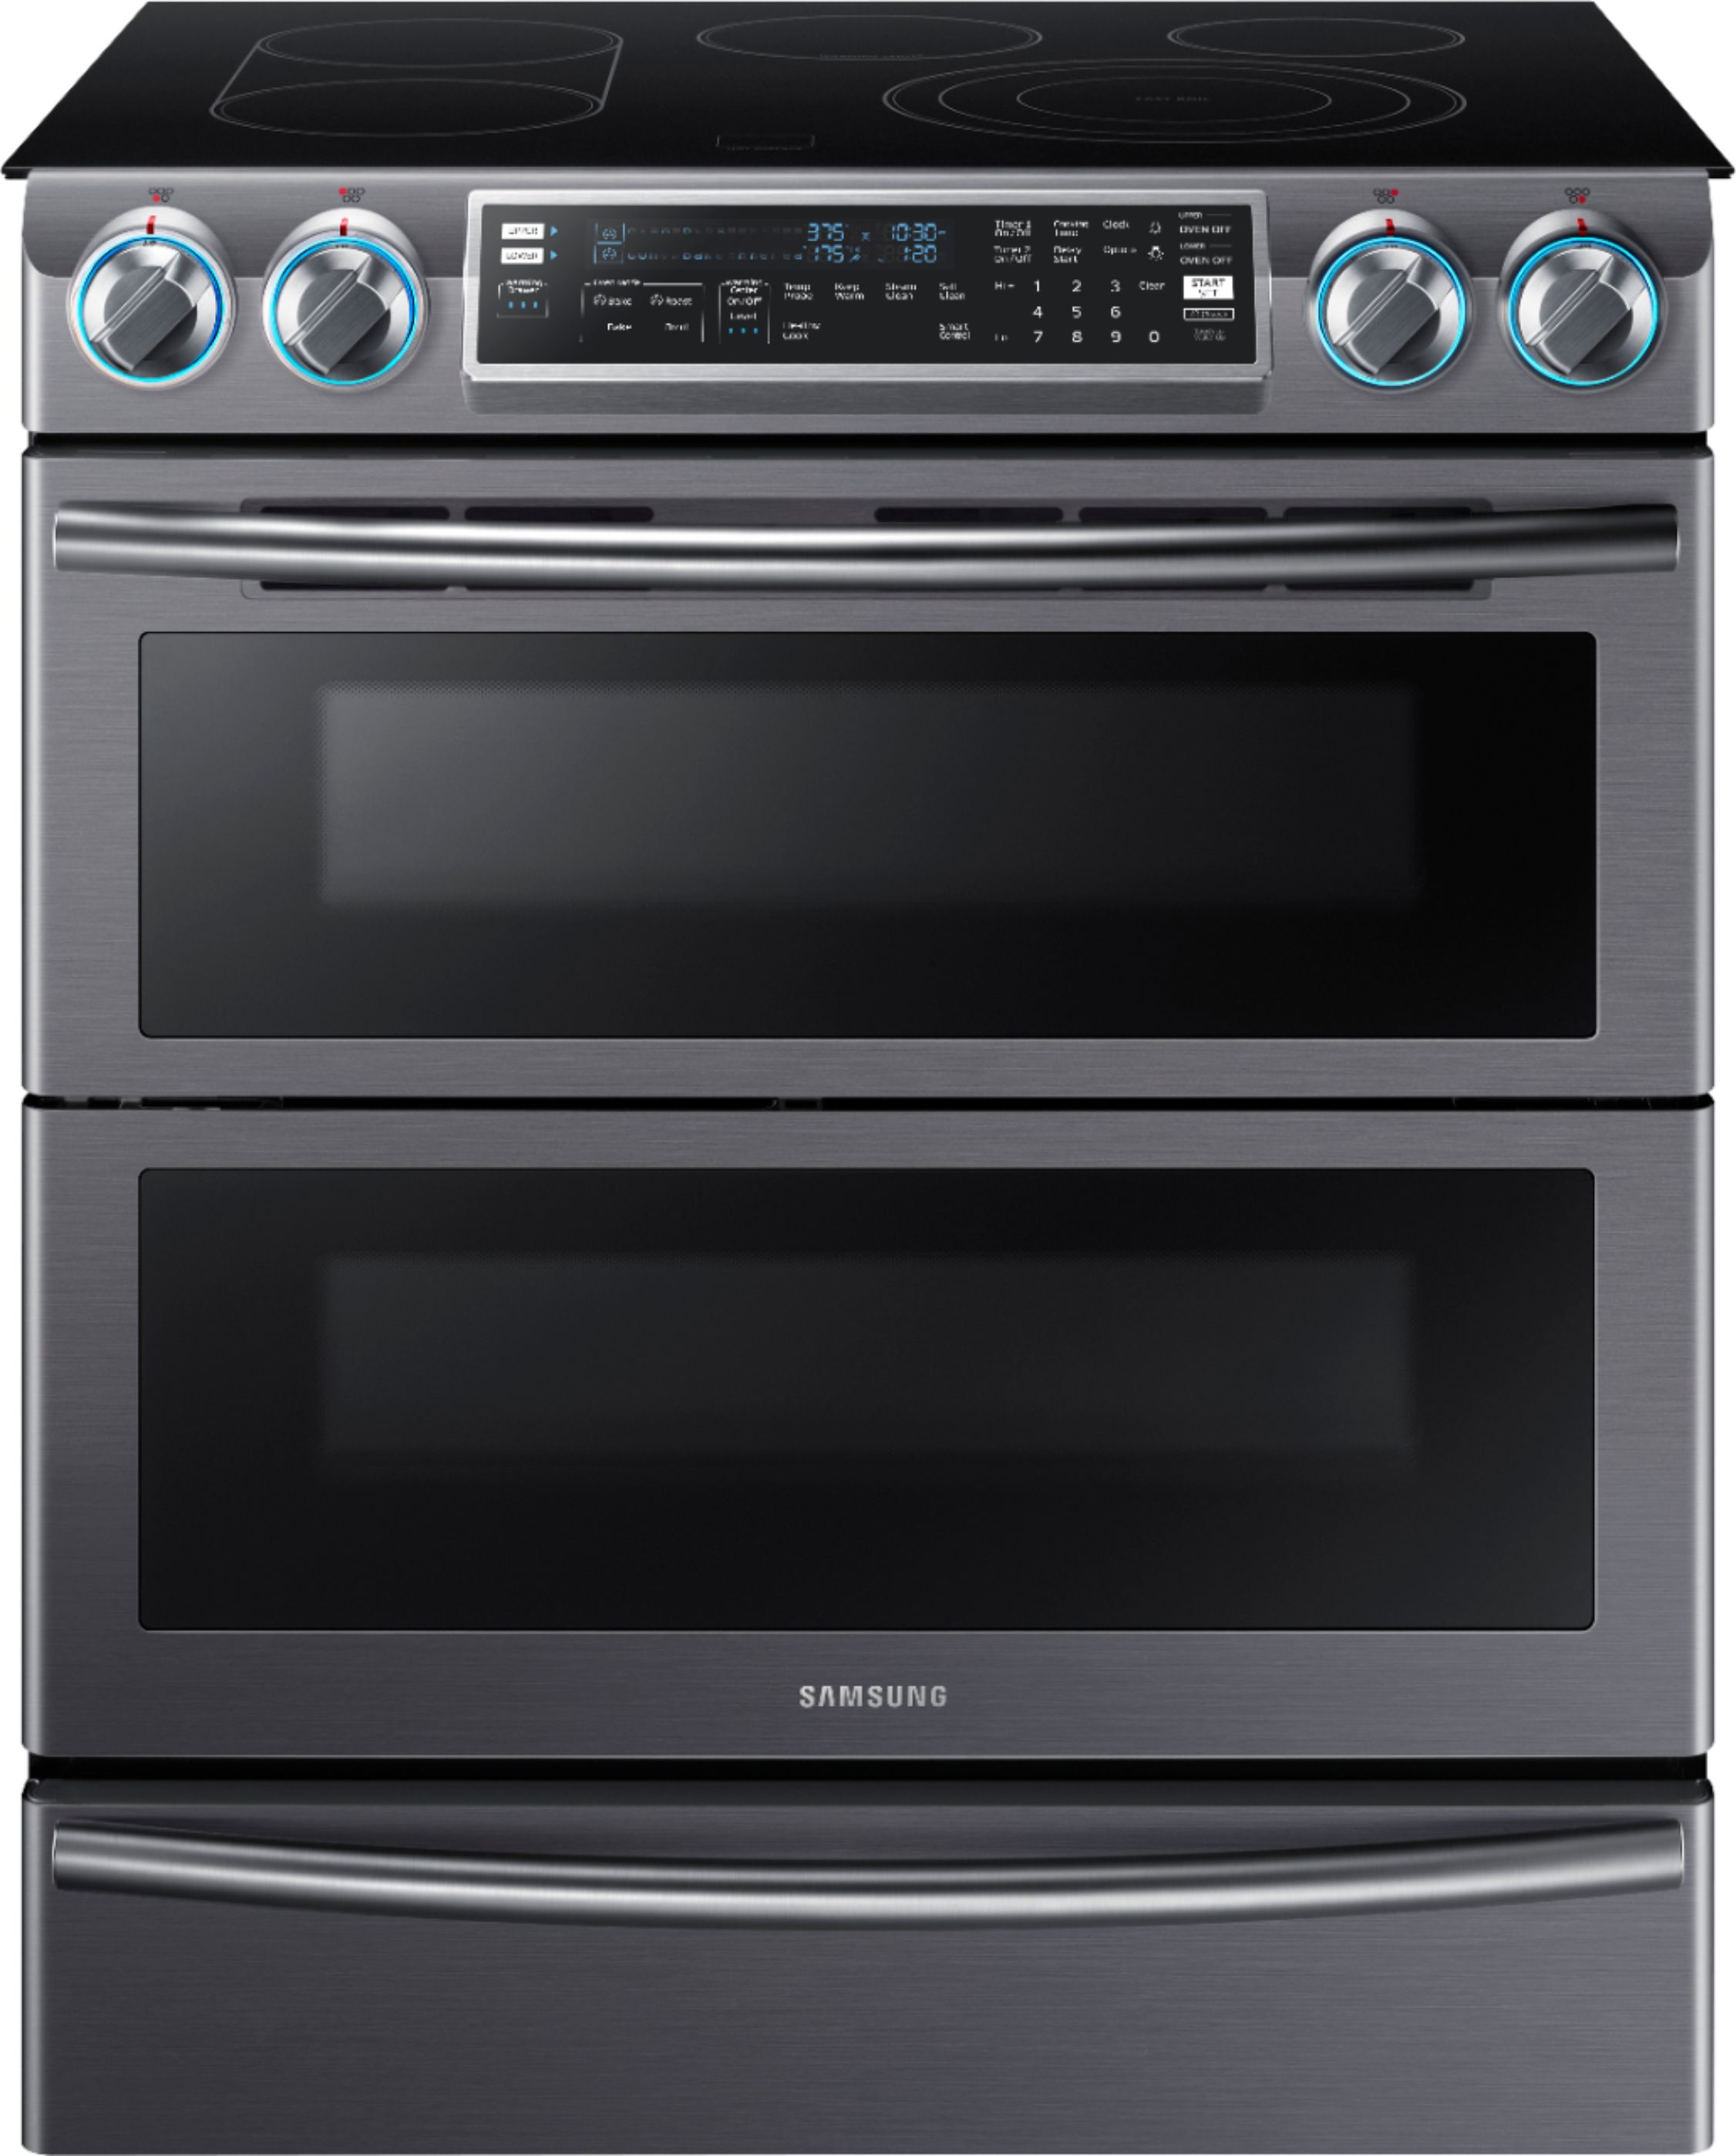 Samsung Flex Duo 5.8 Cu. Ft. Self-Cleaning Slide-In Gas Convection Samsung Flex Duo Electric Range Black Stainless Steel